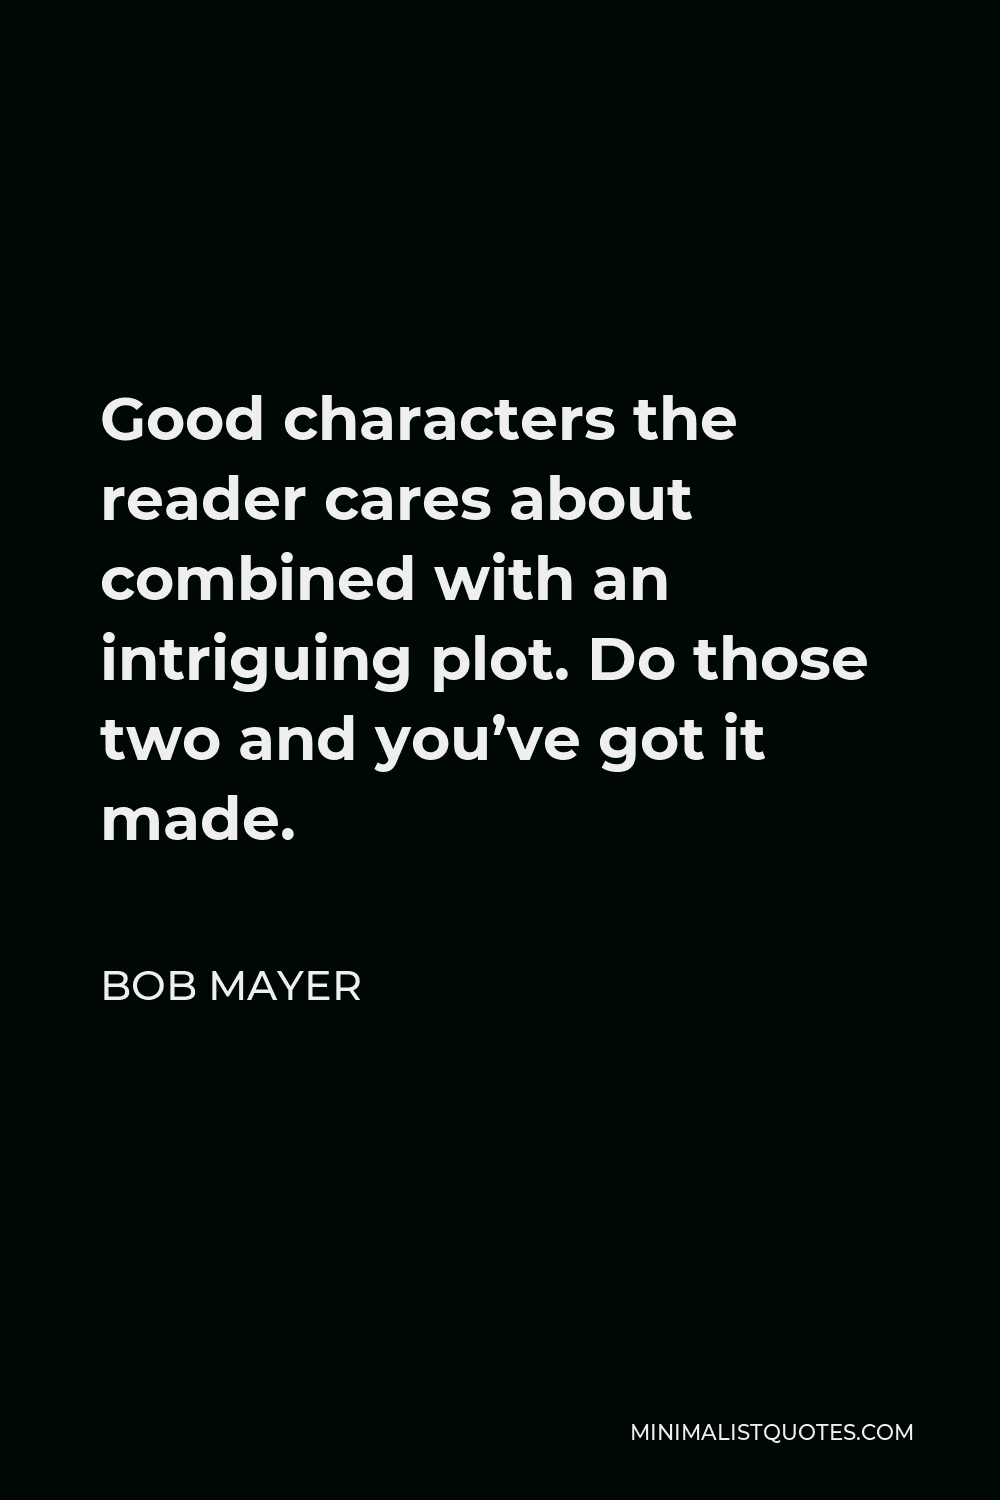 Bob Mayer Quote - Good characters the reader cares about combined with an intriguing plot. Do those two and you’ve got it made.